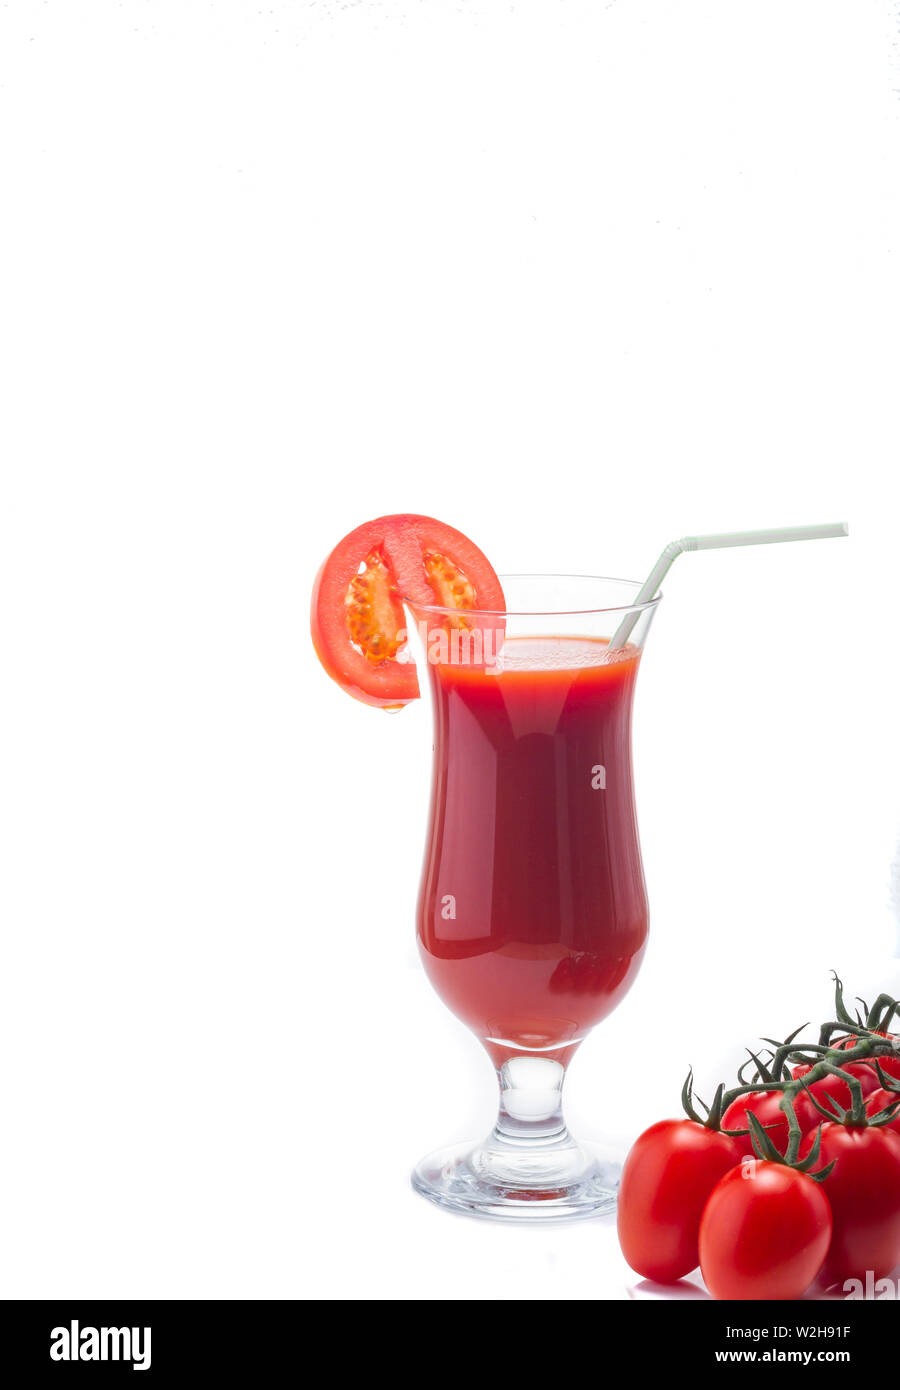 Fresh tomato juice. Juice in a glass. Red juice. Healthy drink. Tomatoes in the diet. Stock Photo